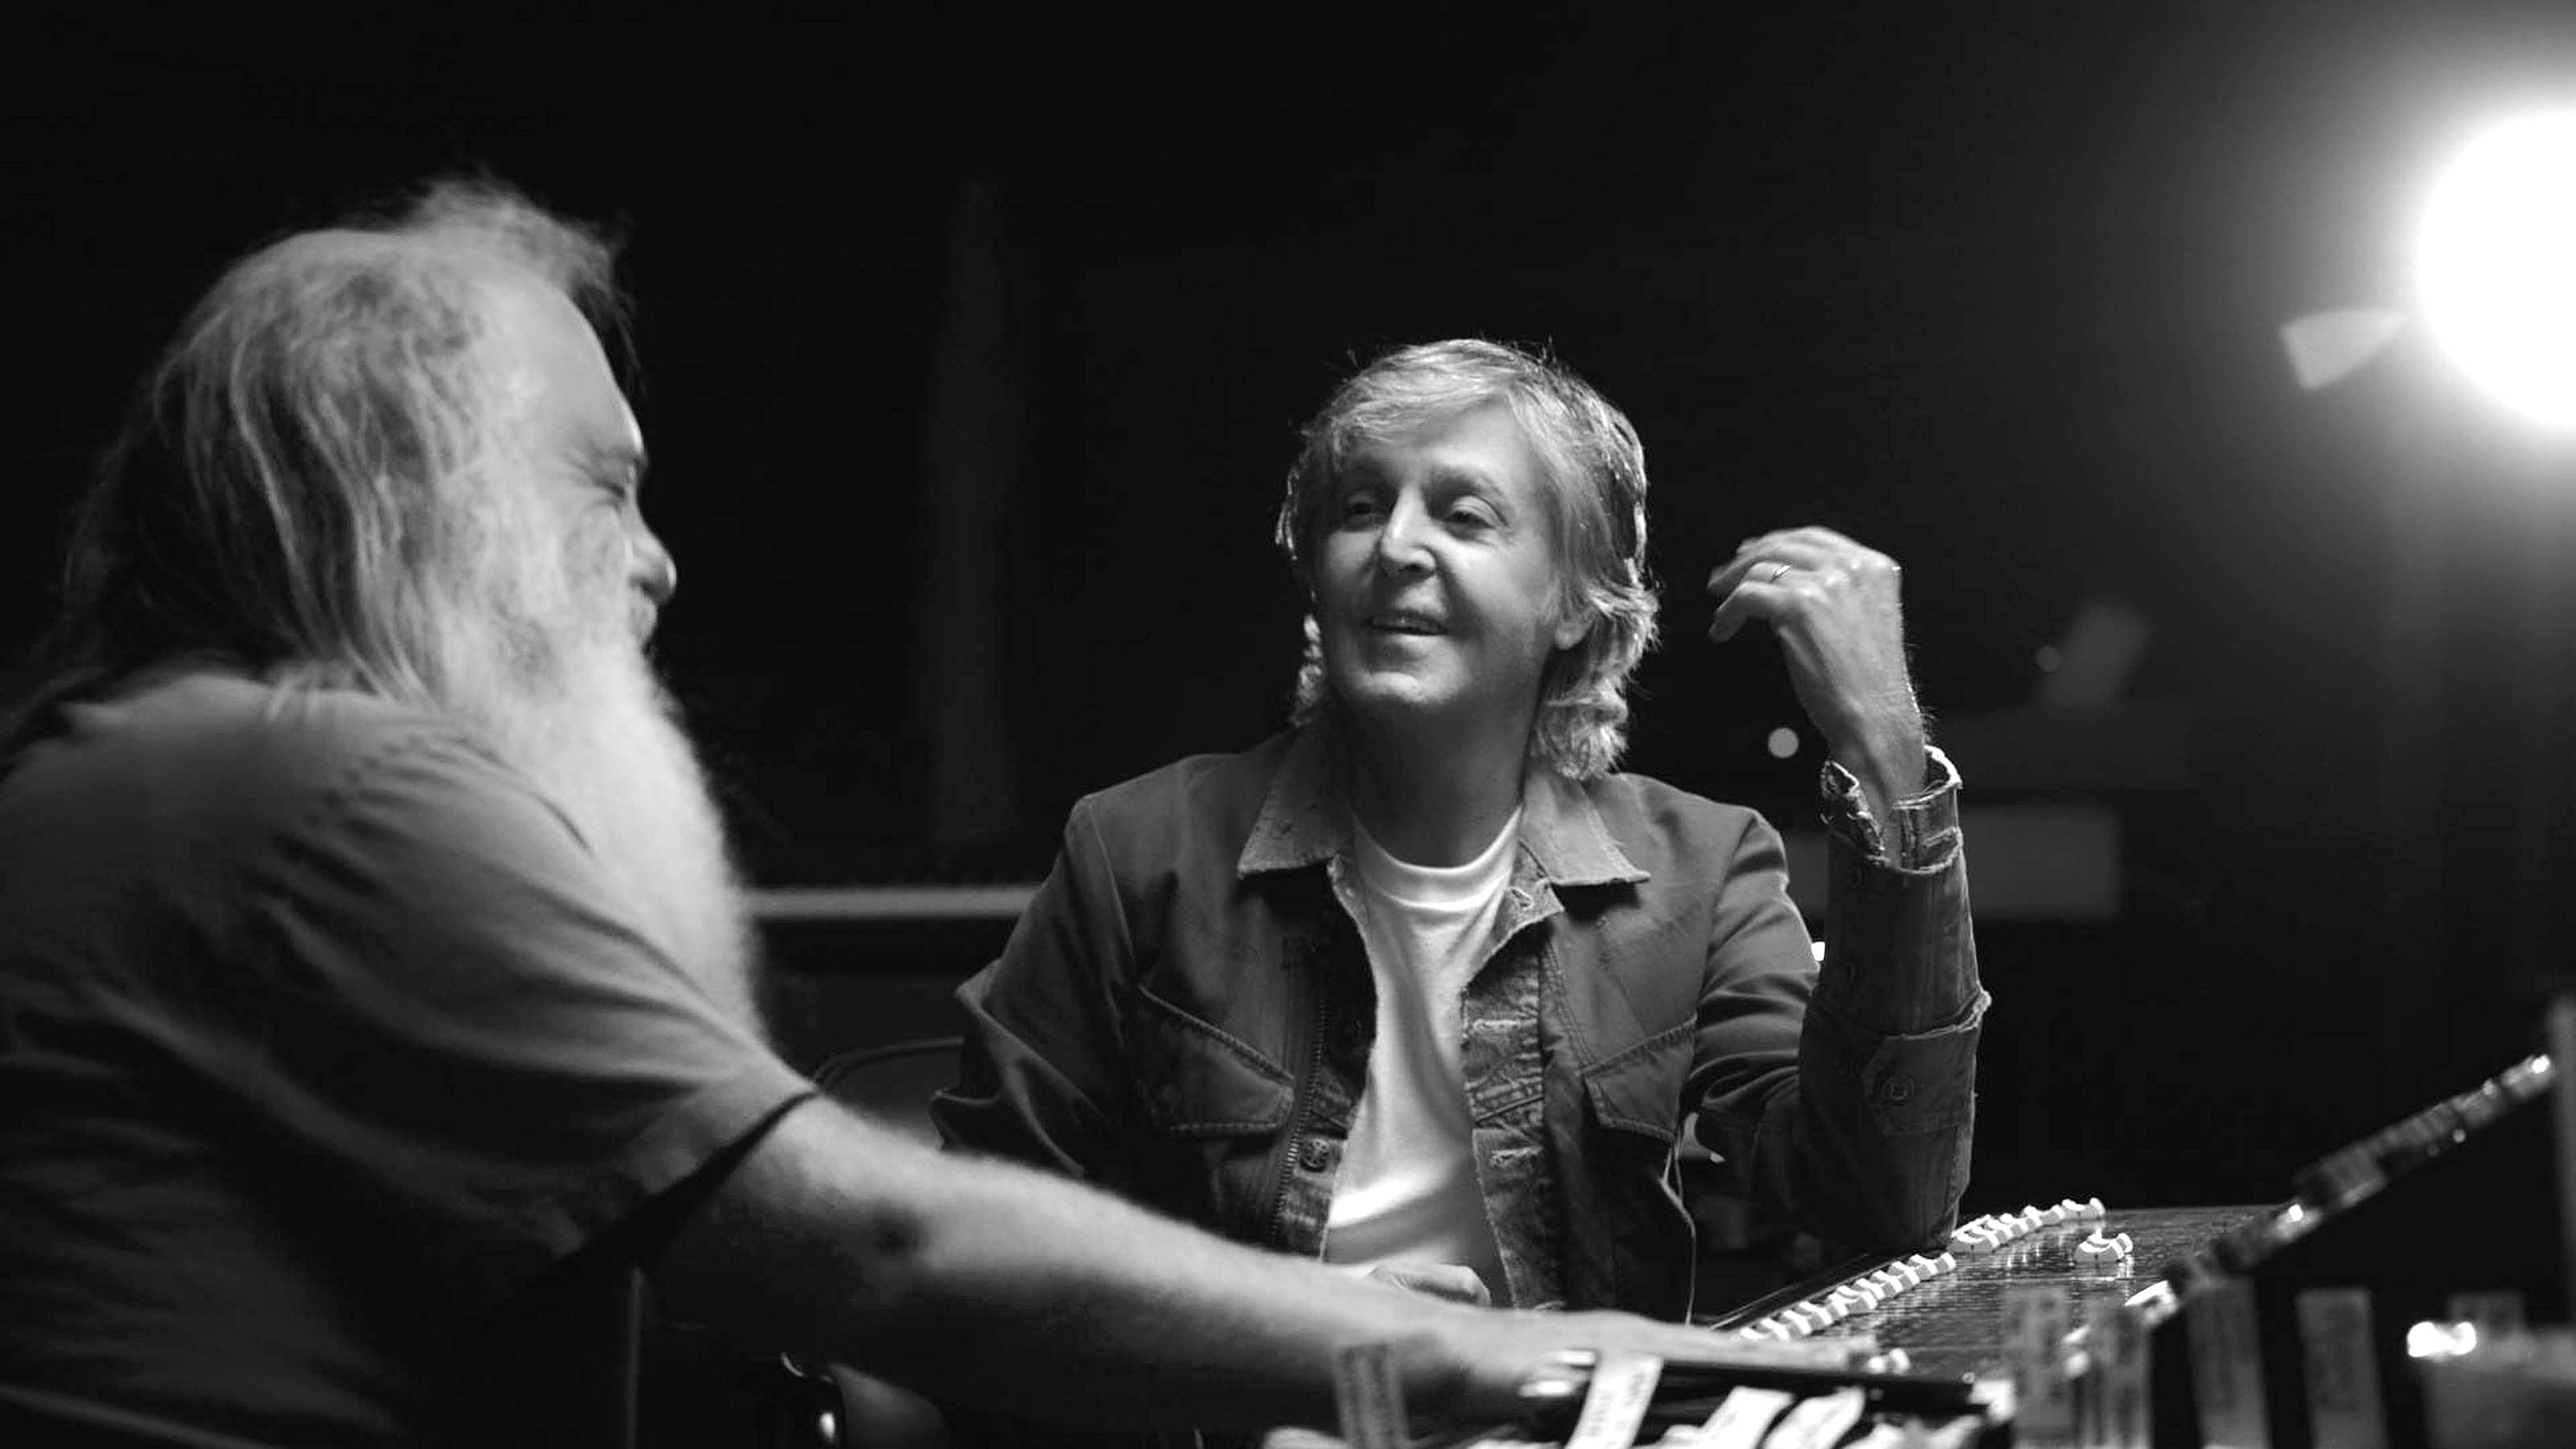 Black and white photo of Paul at a mixing desk talking to Rick Rubin